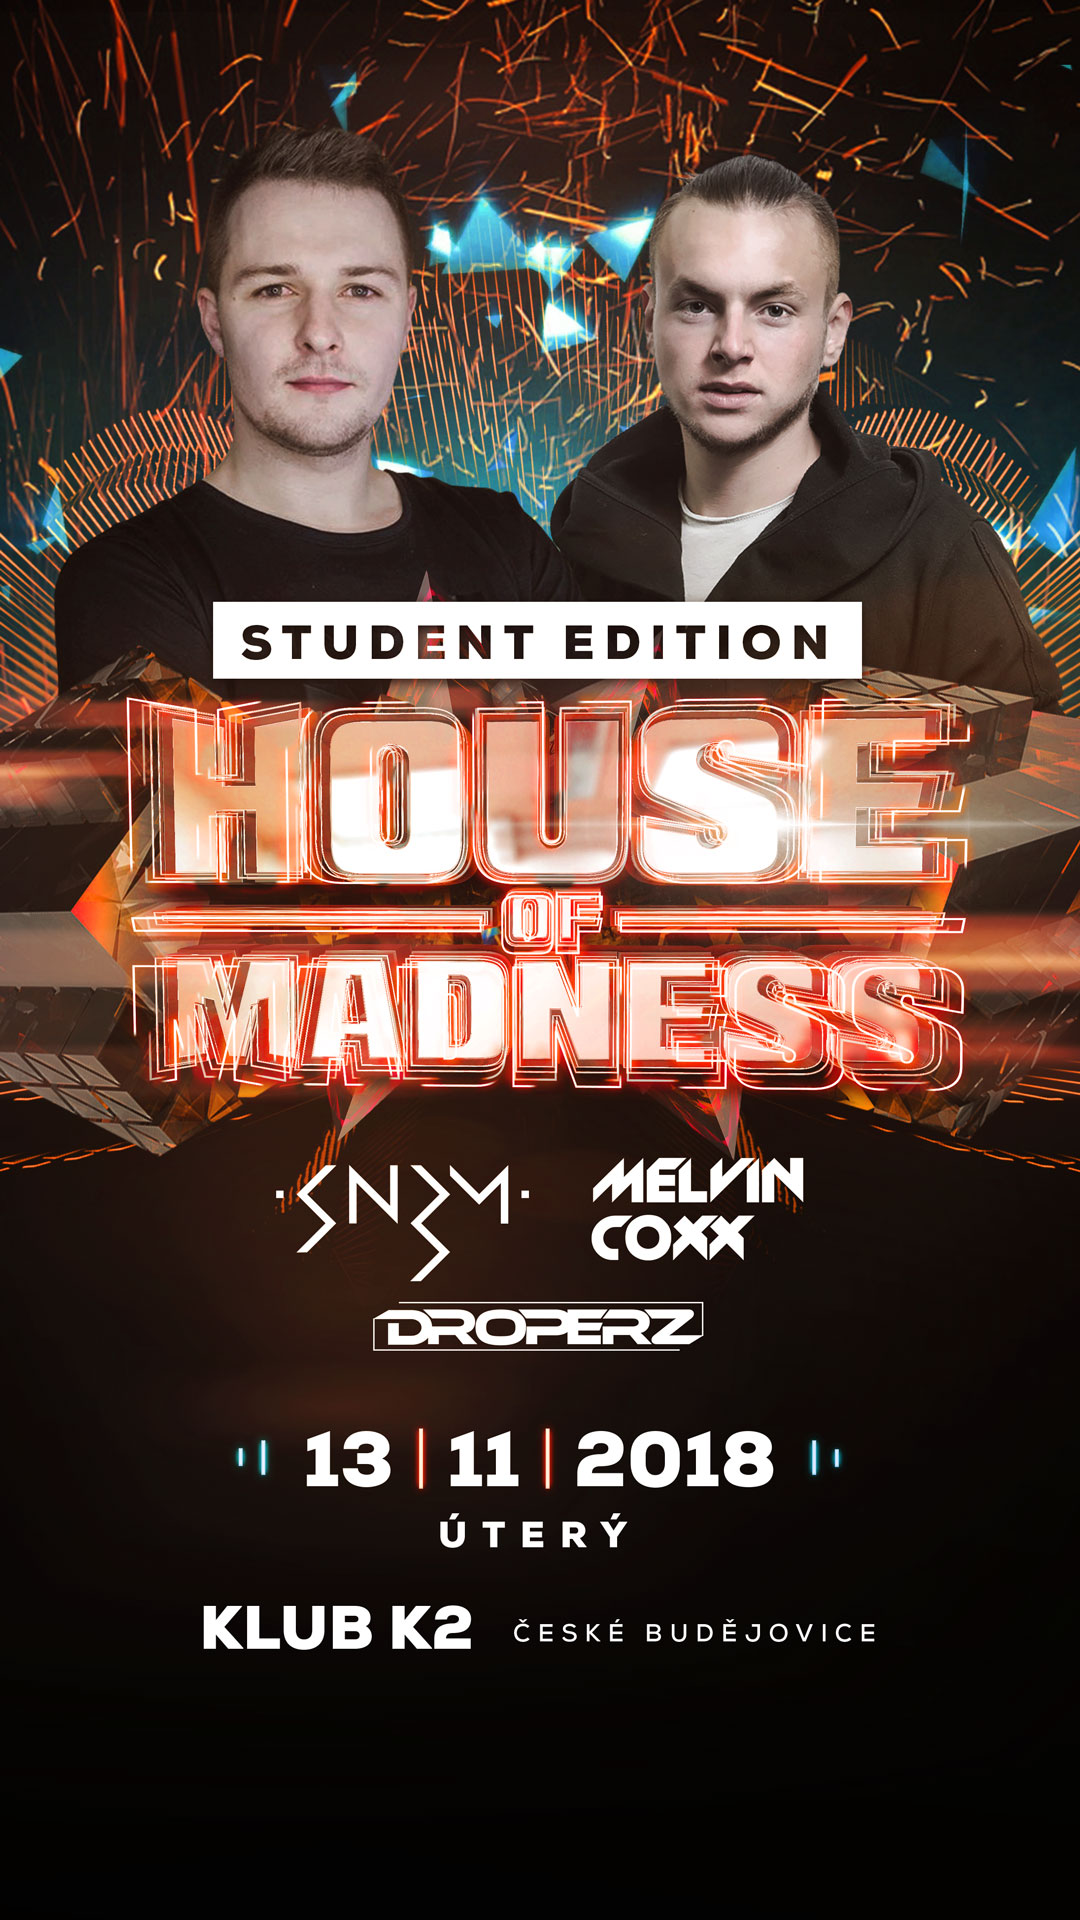 House of madness - student edition